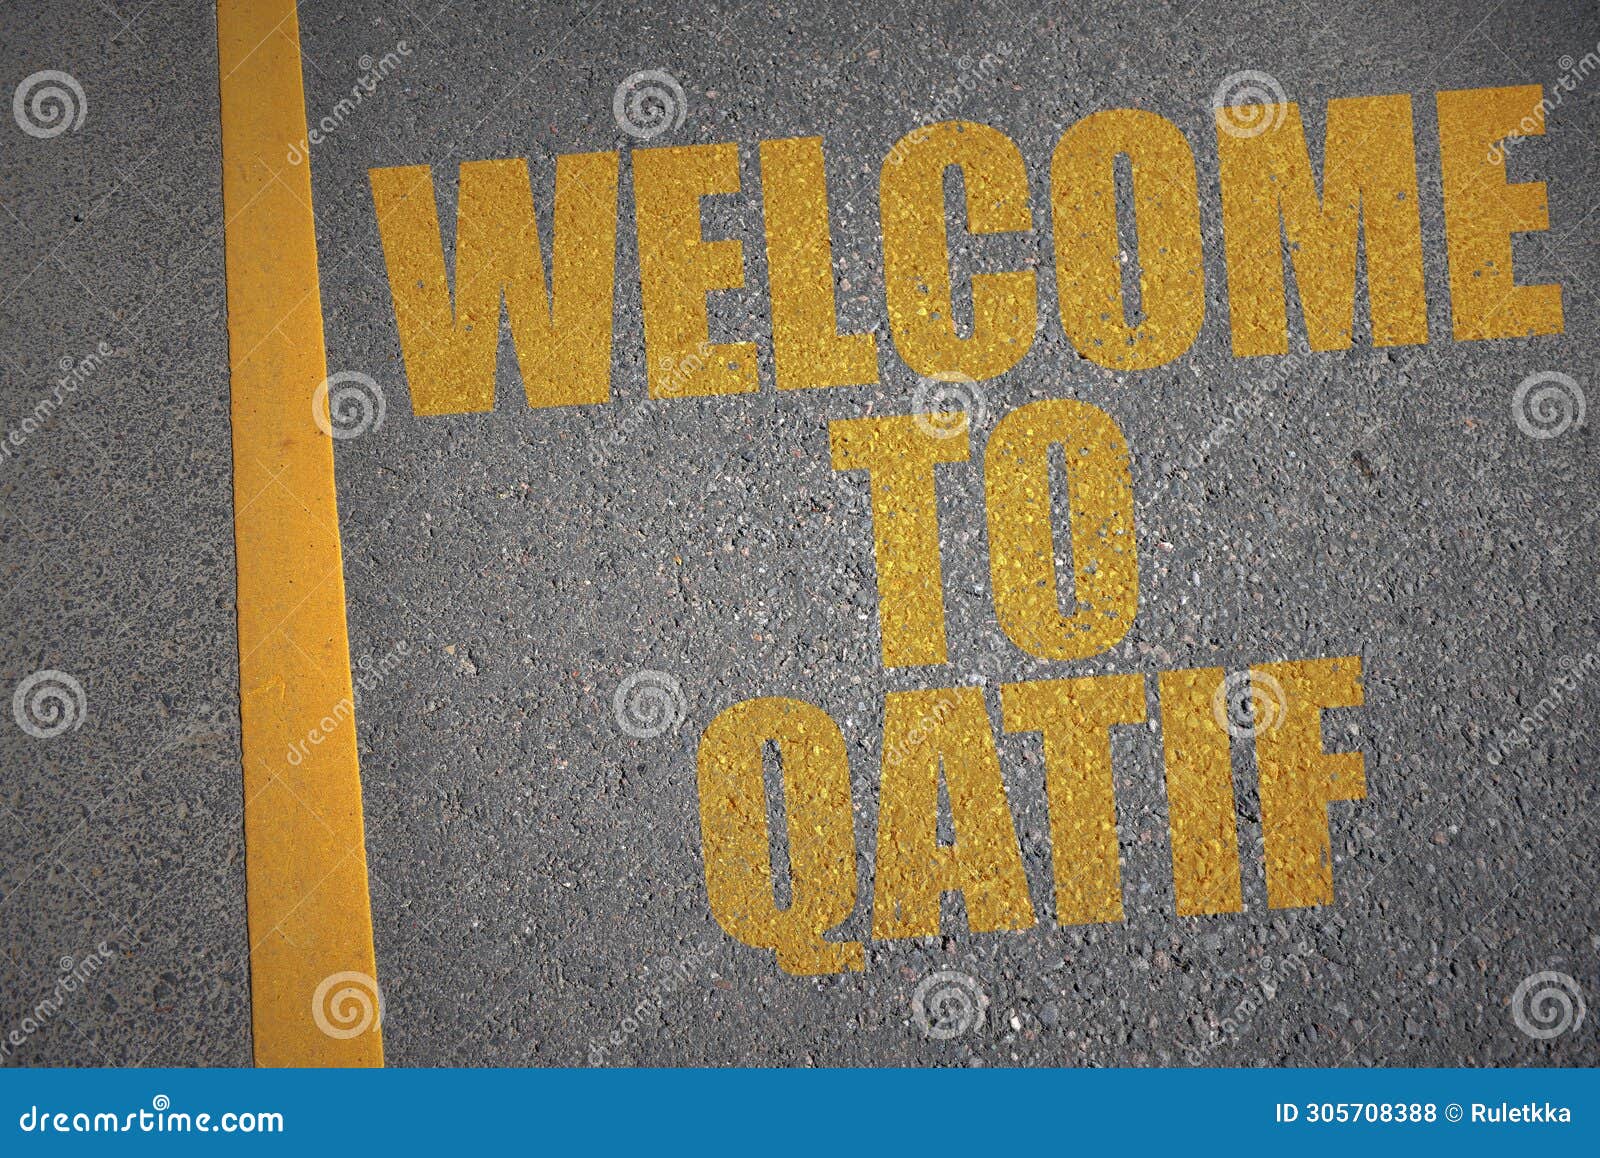 asphalt road with text welcome to qatif near yellow line